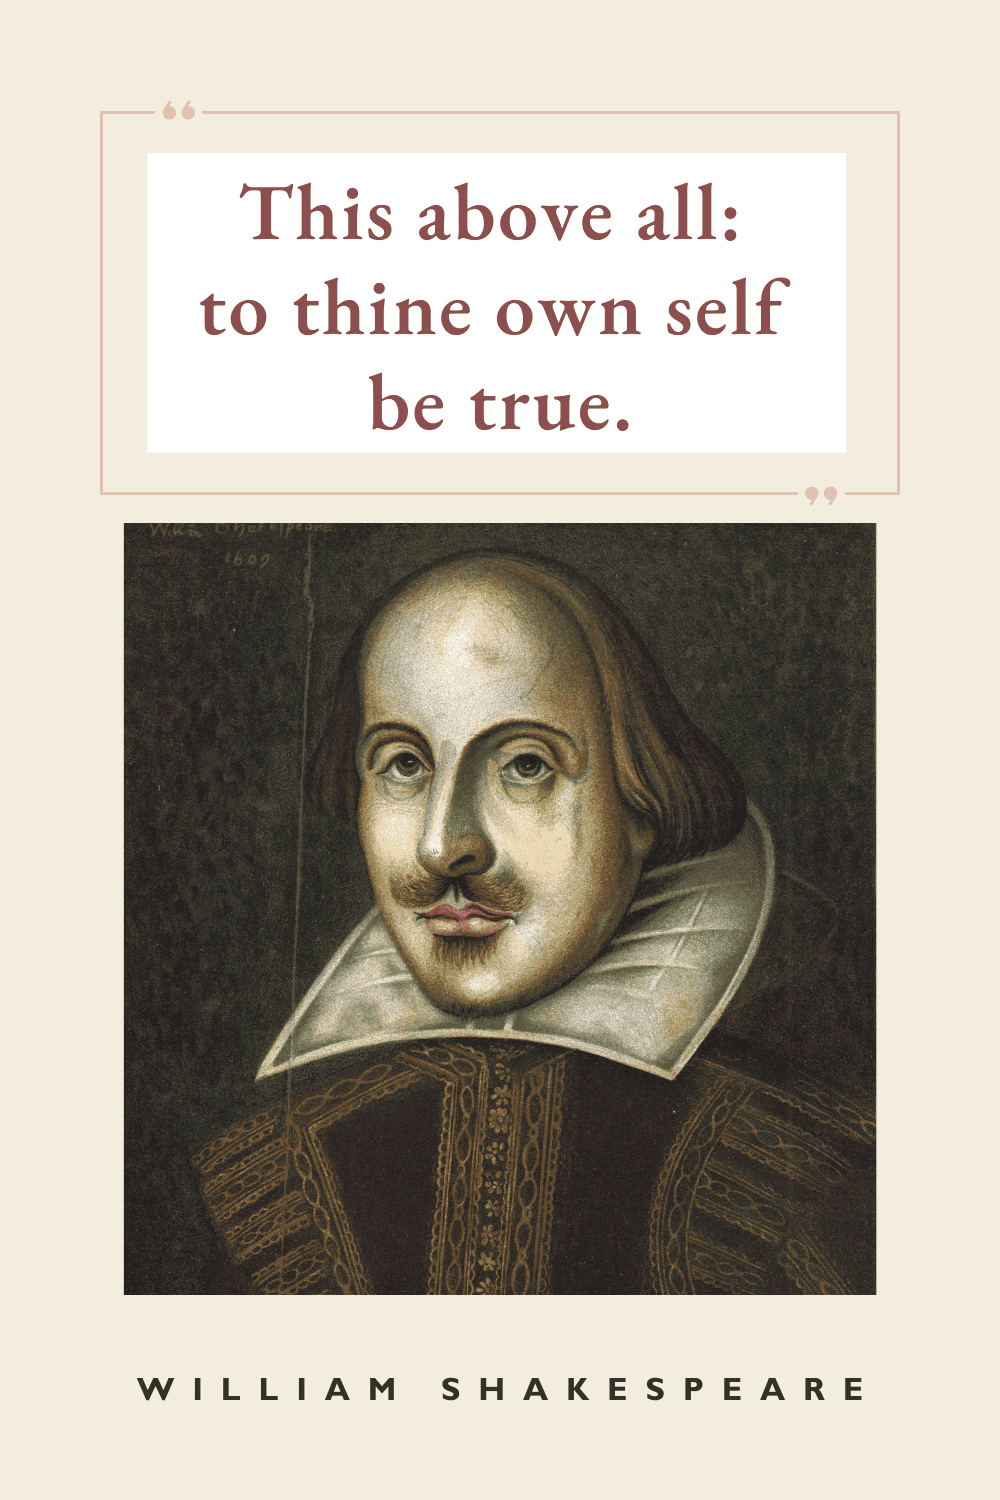 This above all: to thine own self be true.